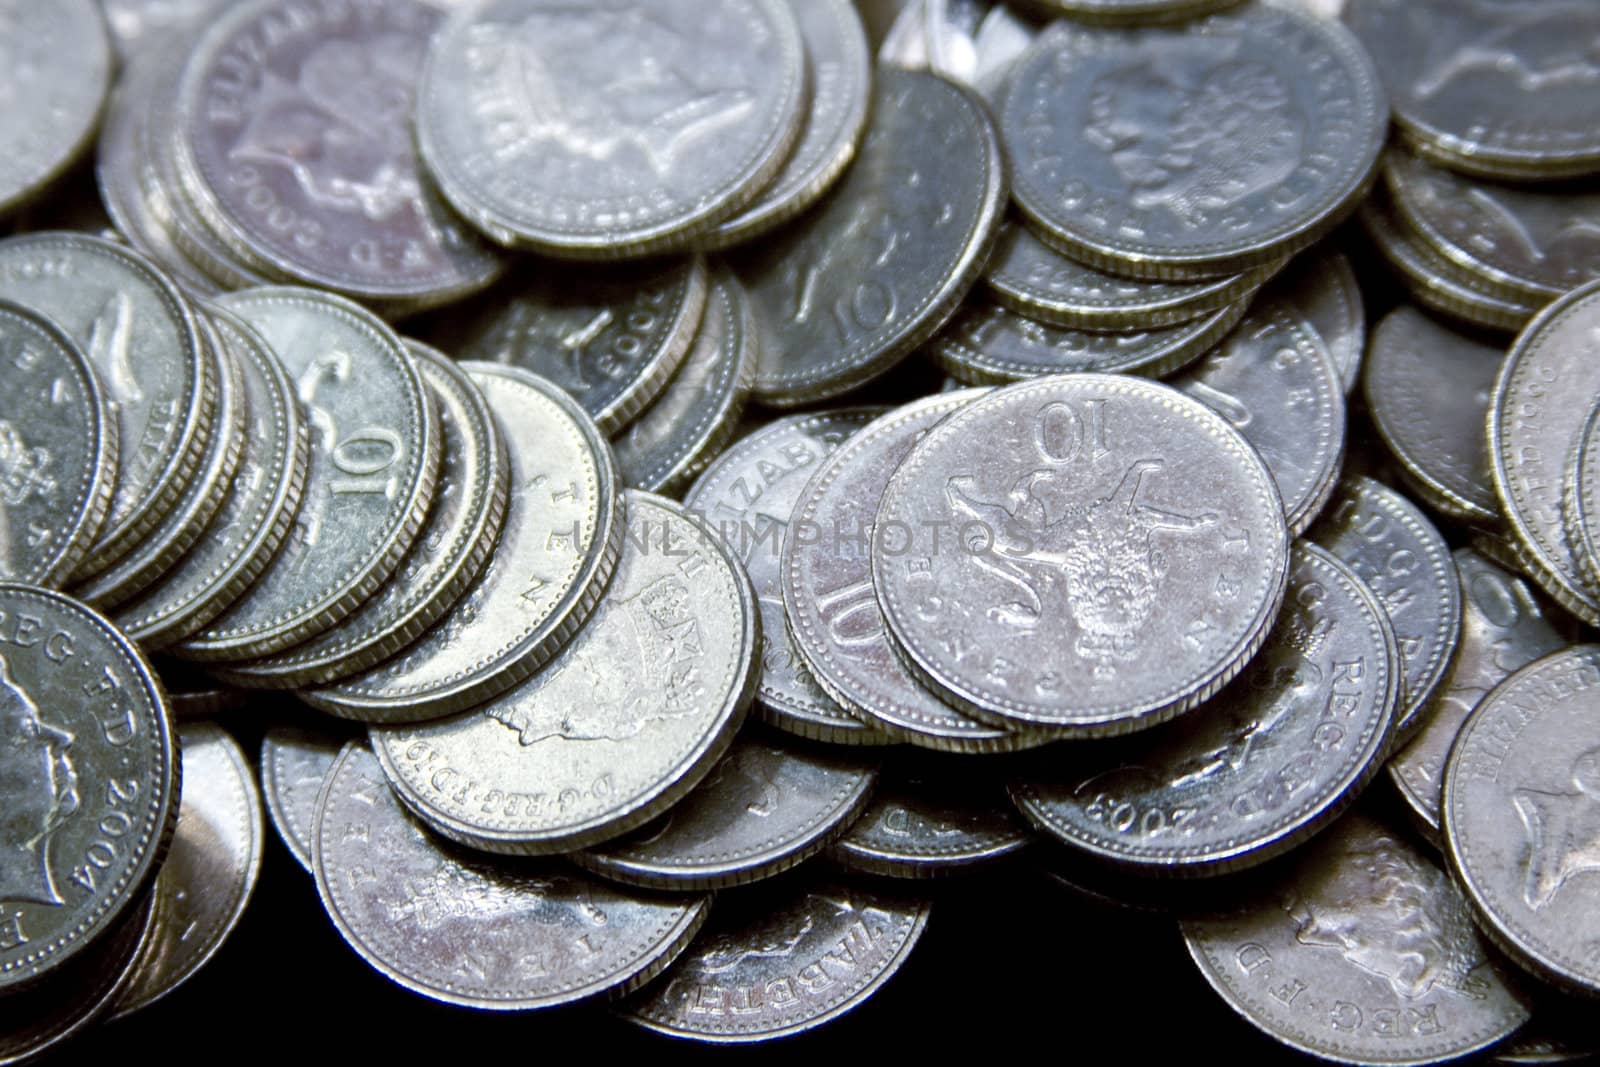 Untidy heap of silver British coins piled up